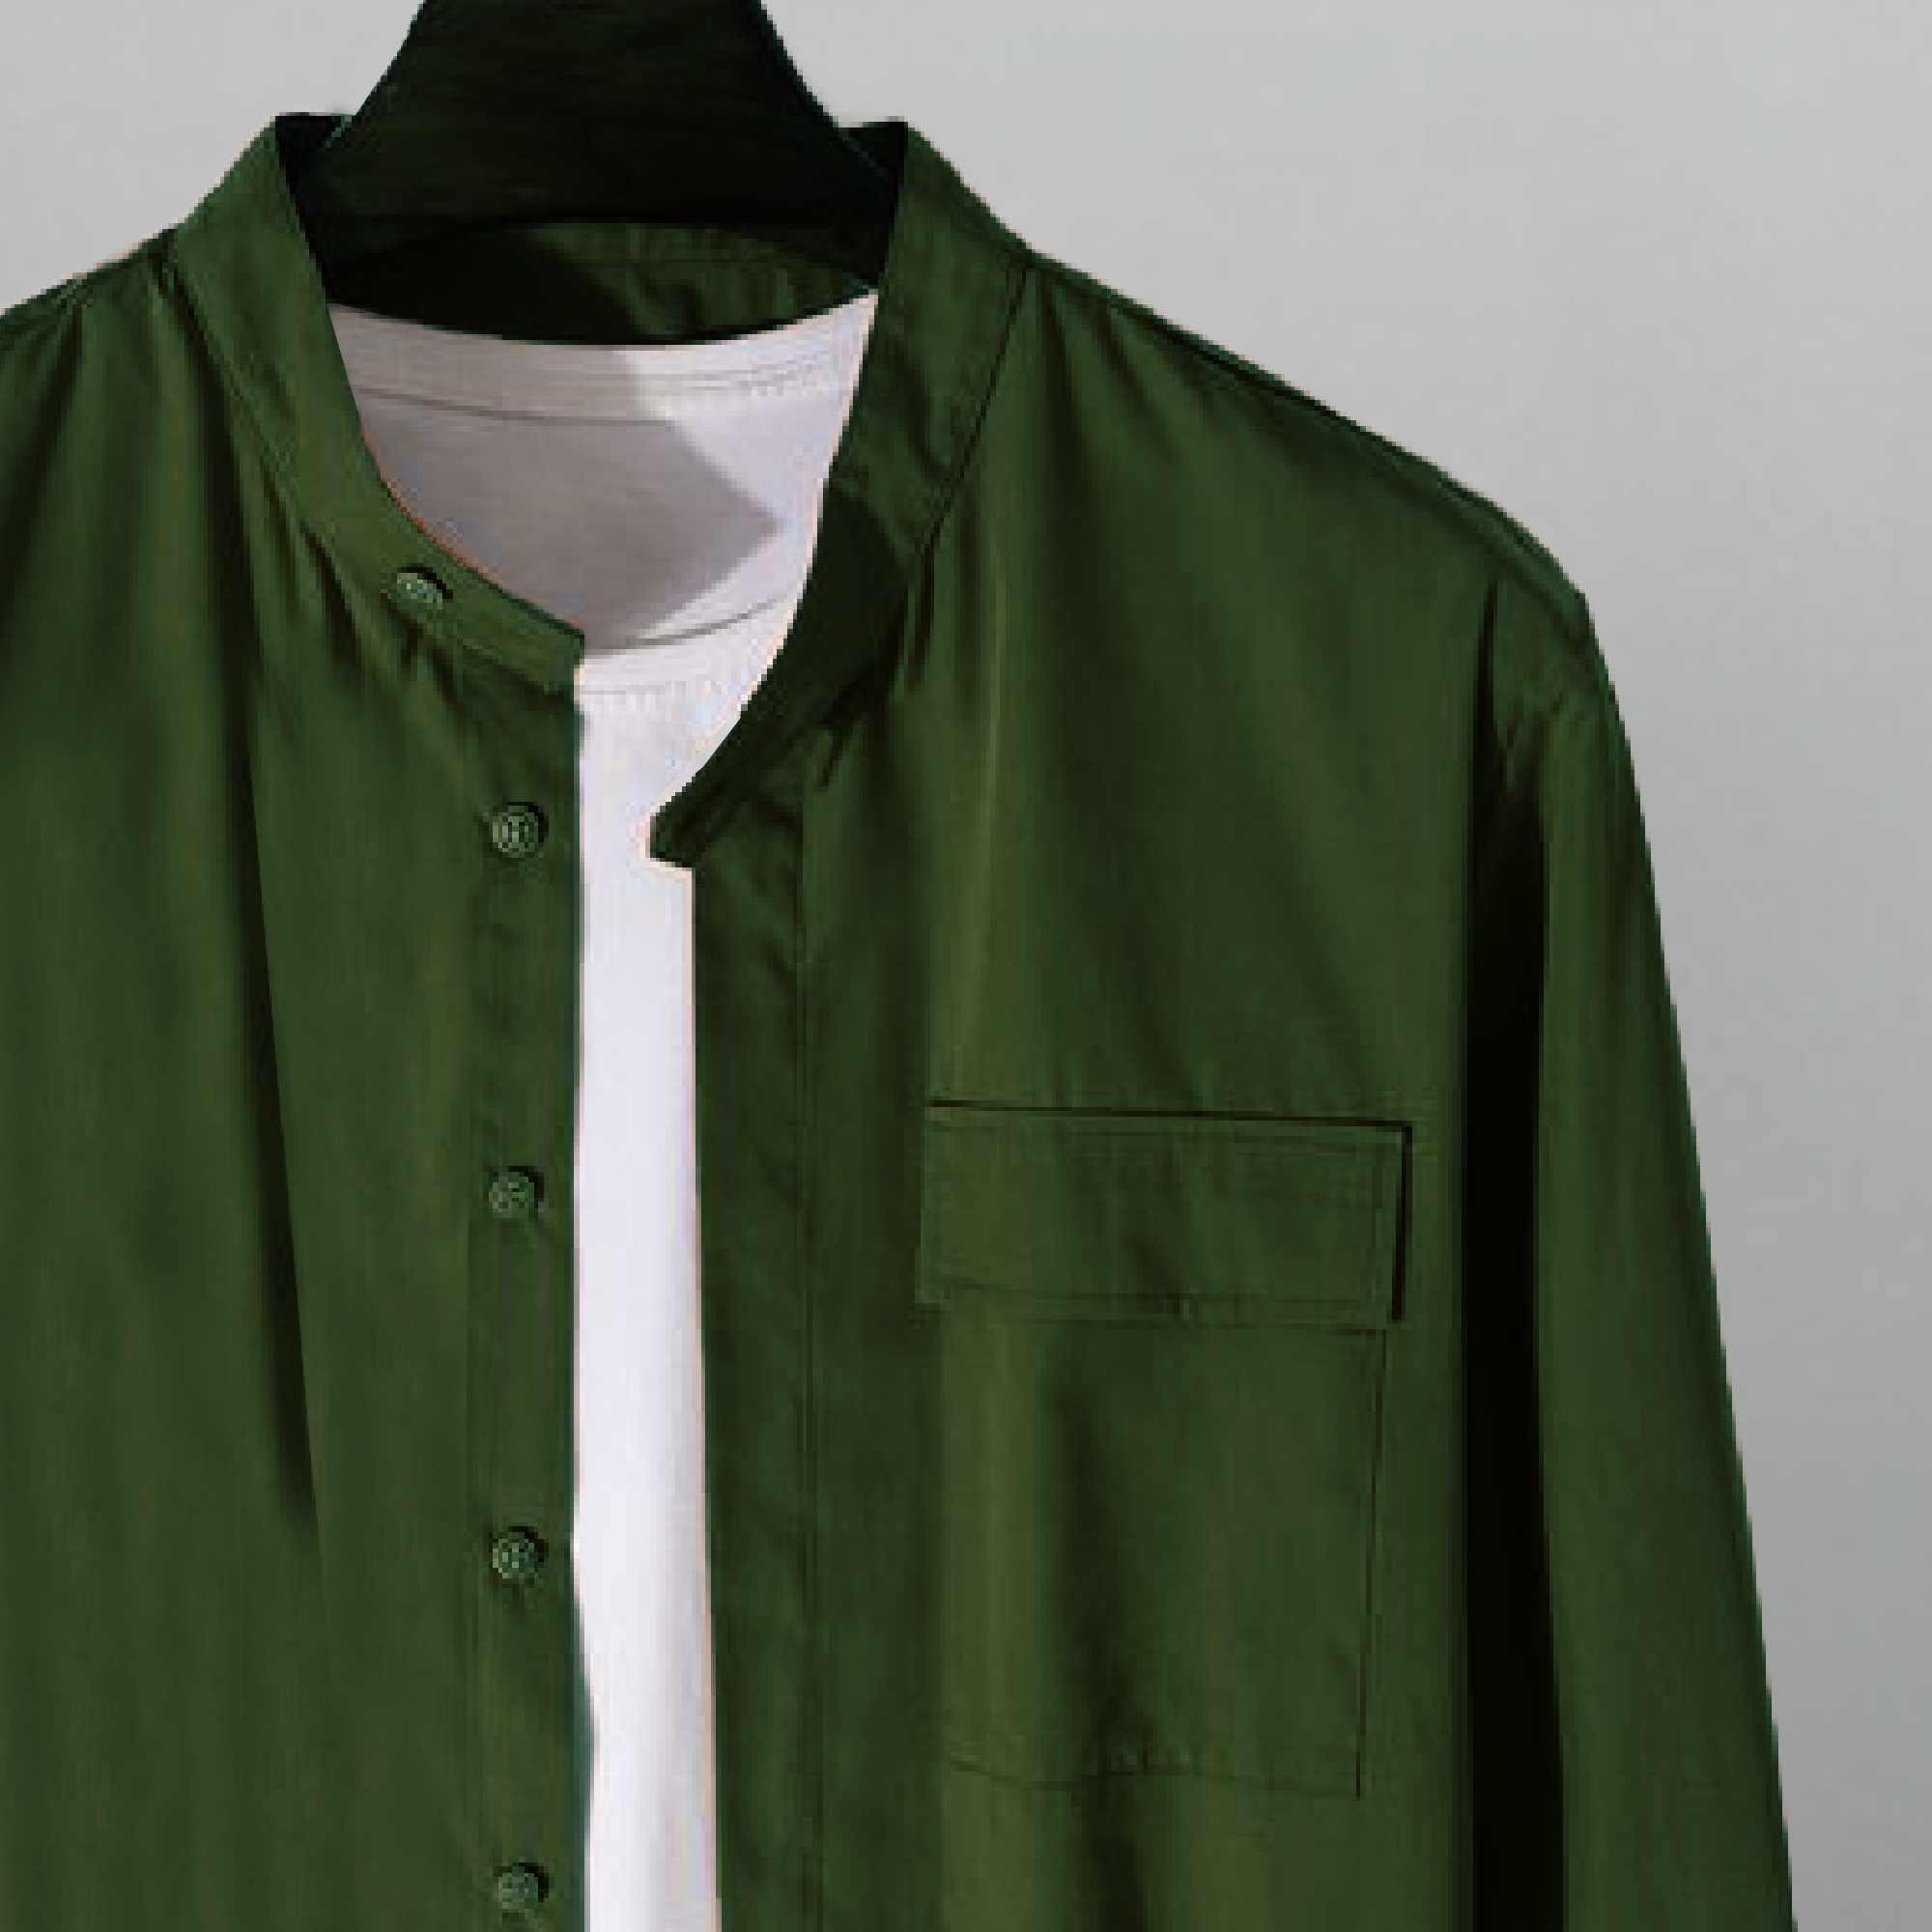 Men's Solid Green Corduroy Shirt with one side pocket and A Plain white T-shirt-RMS015